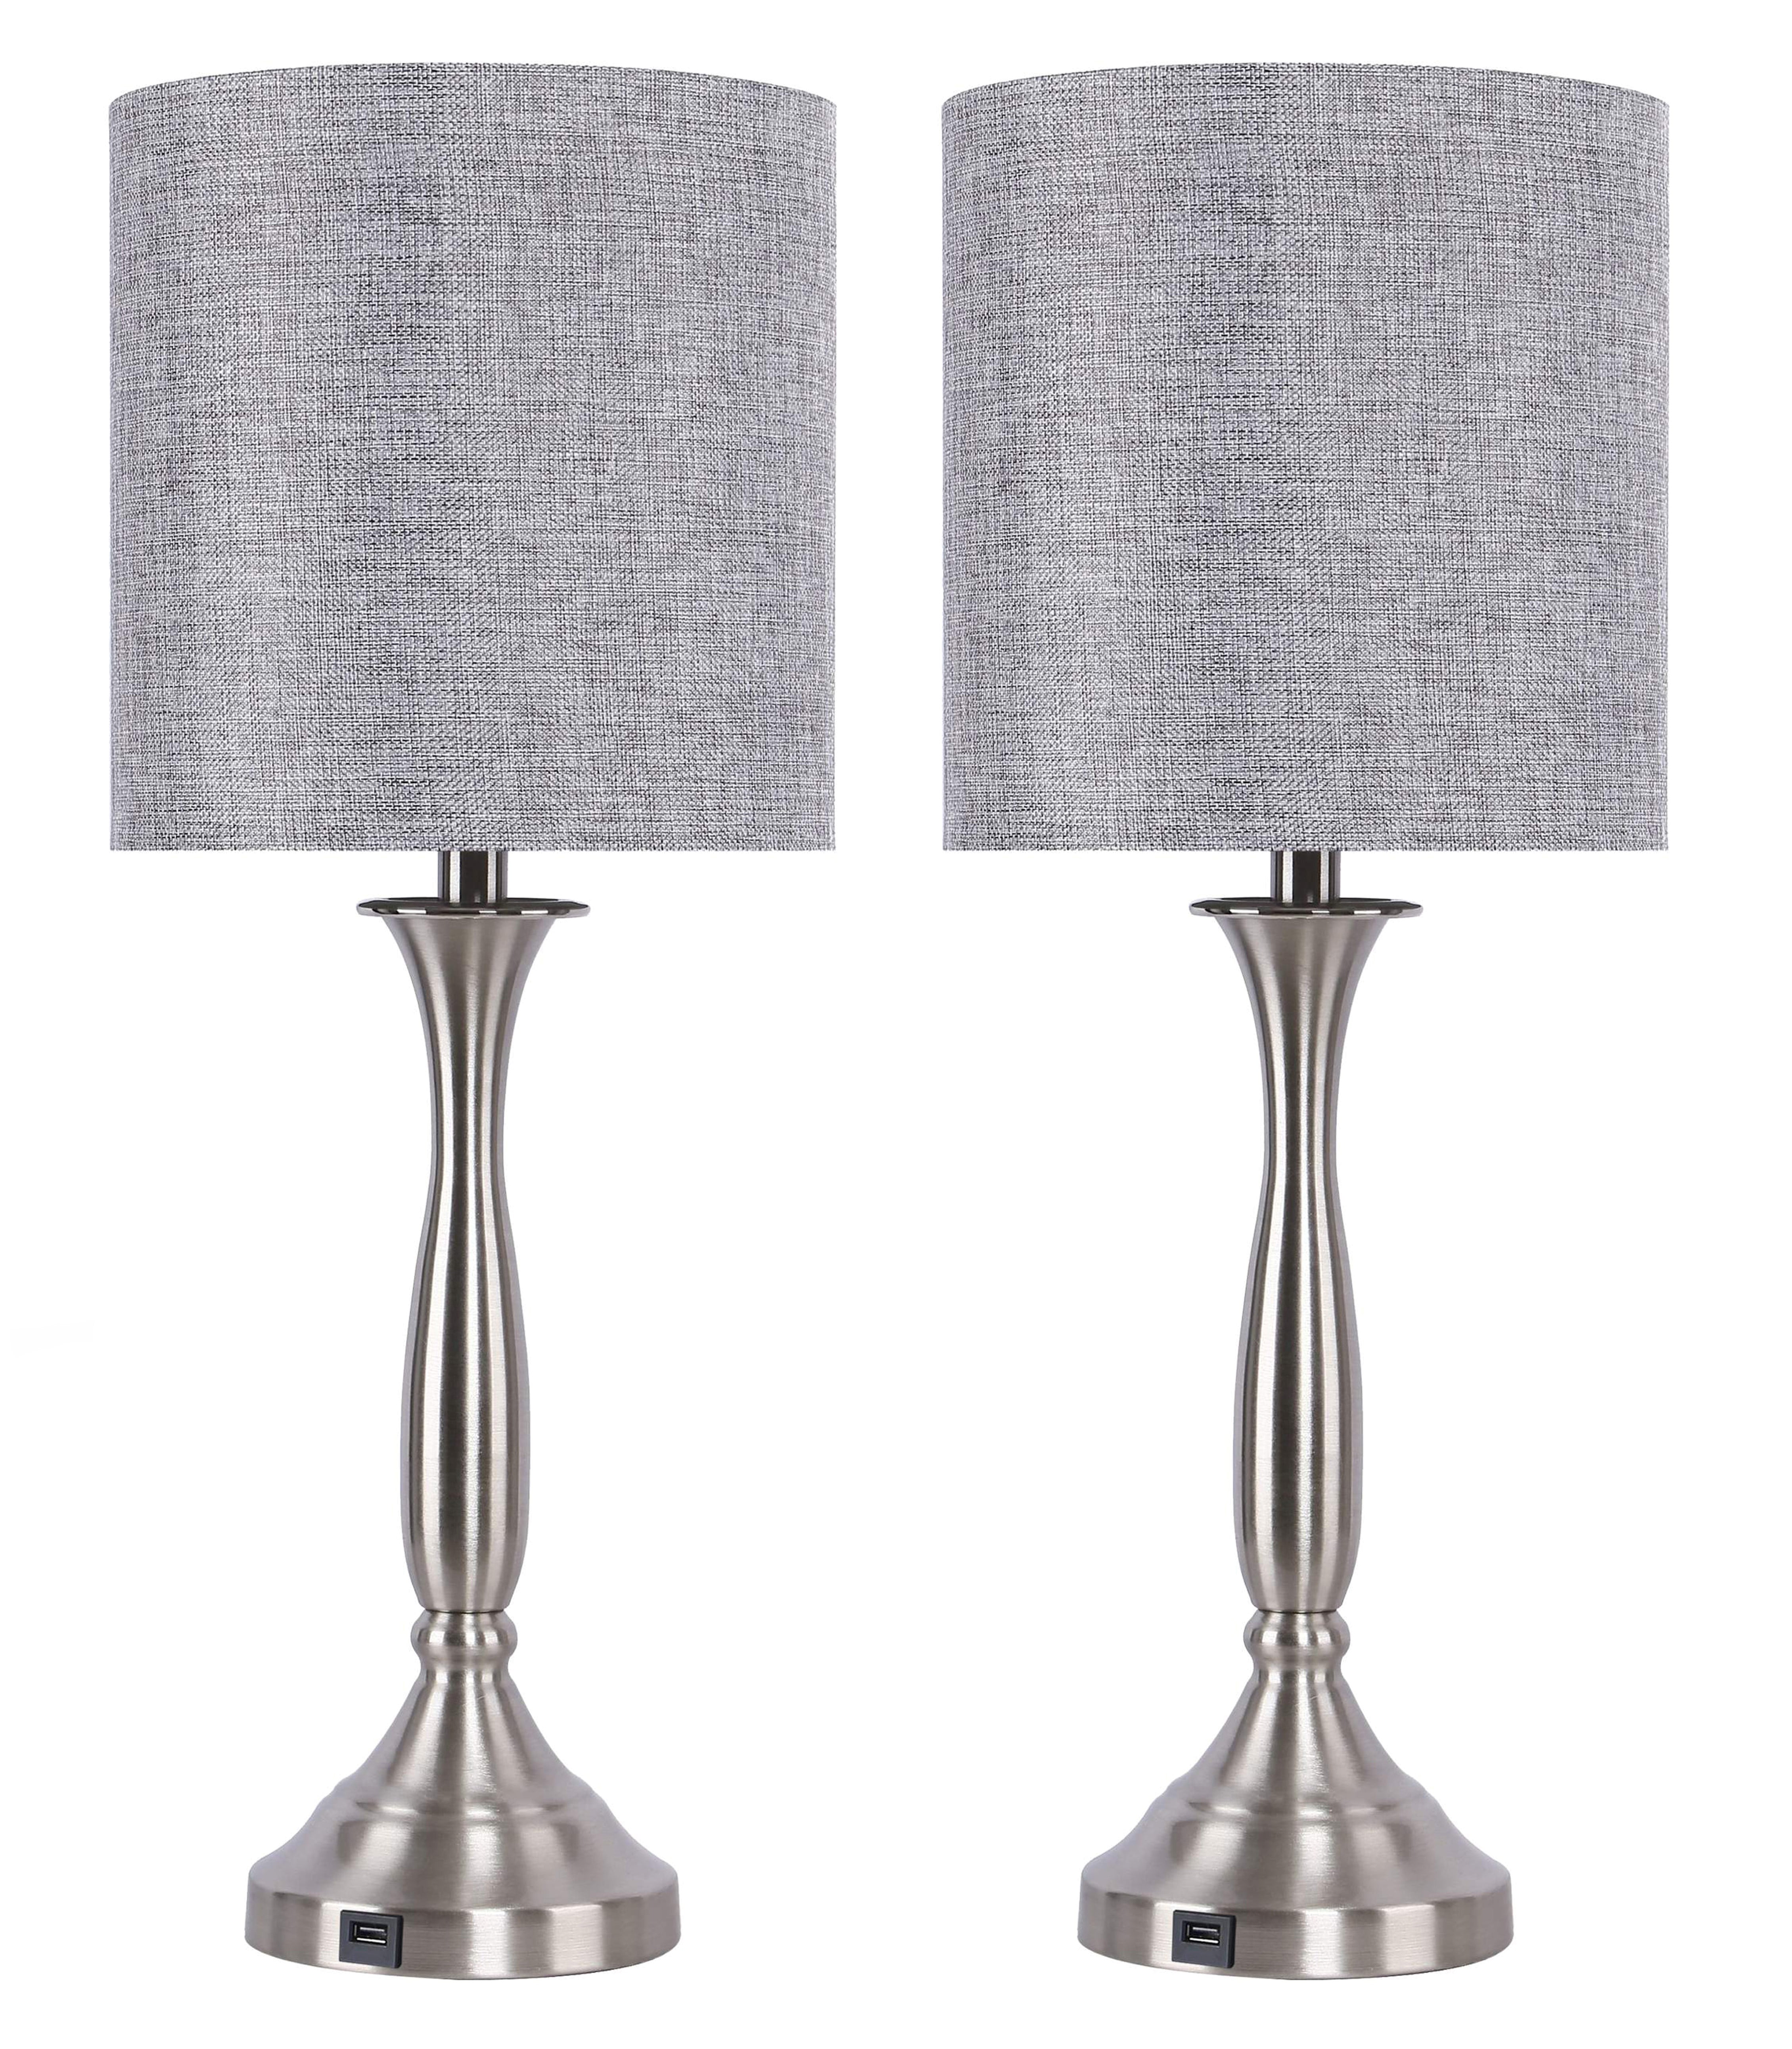 Grandview Gallery 25 5 Inch Tall Modern, Tall Nickel Table Lamp With Black Shade